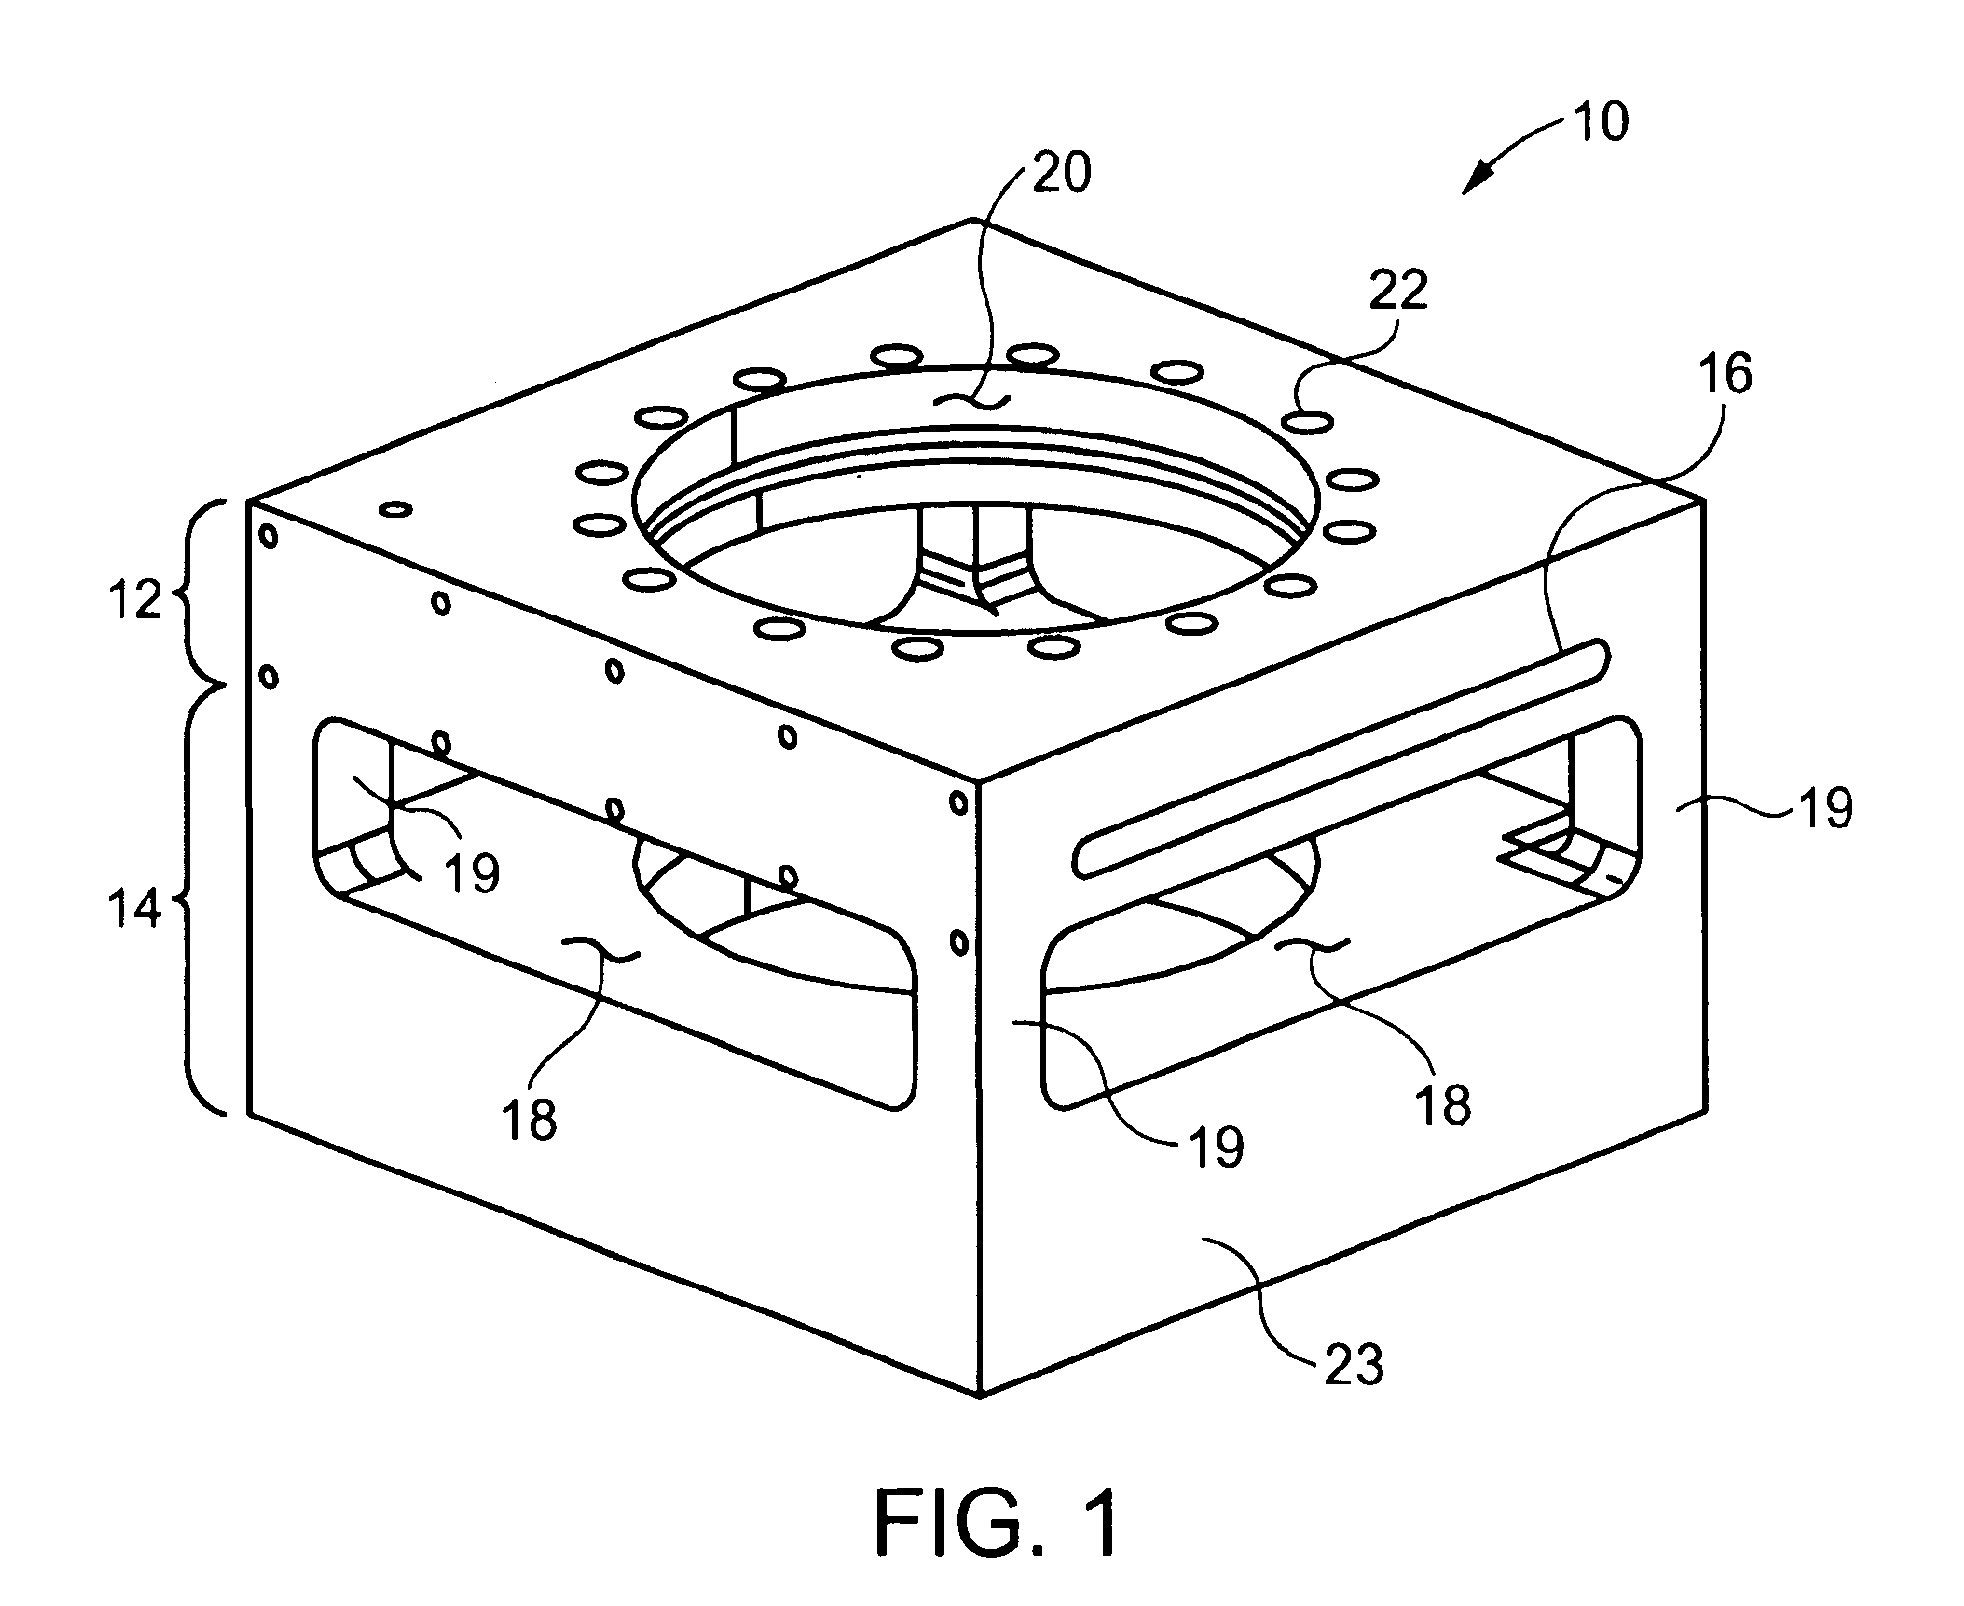 High pressure processing chamber for semiconductor substrate